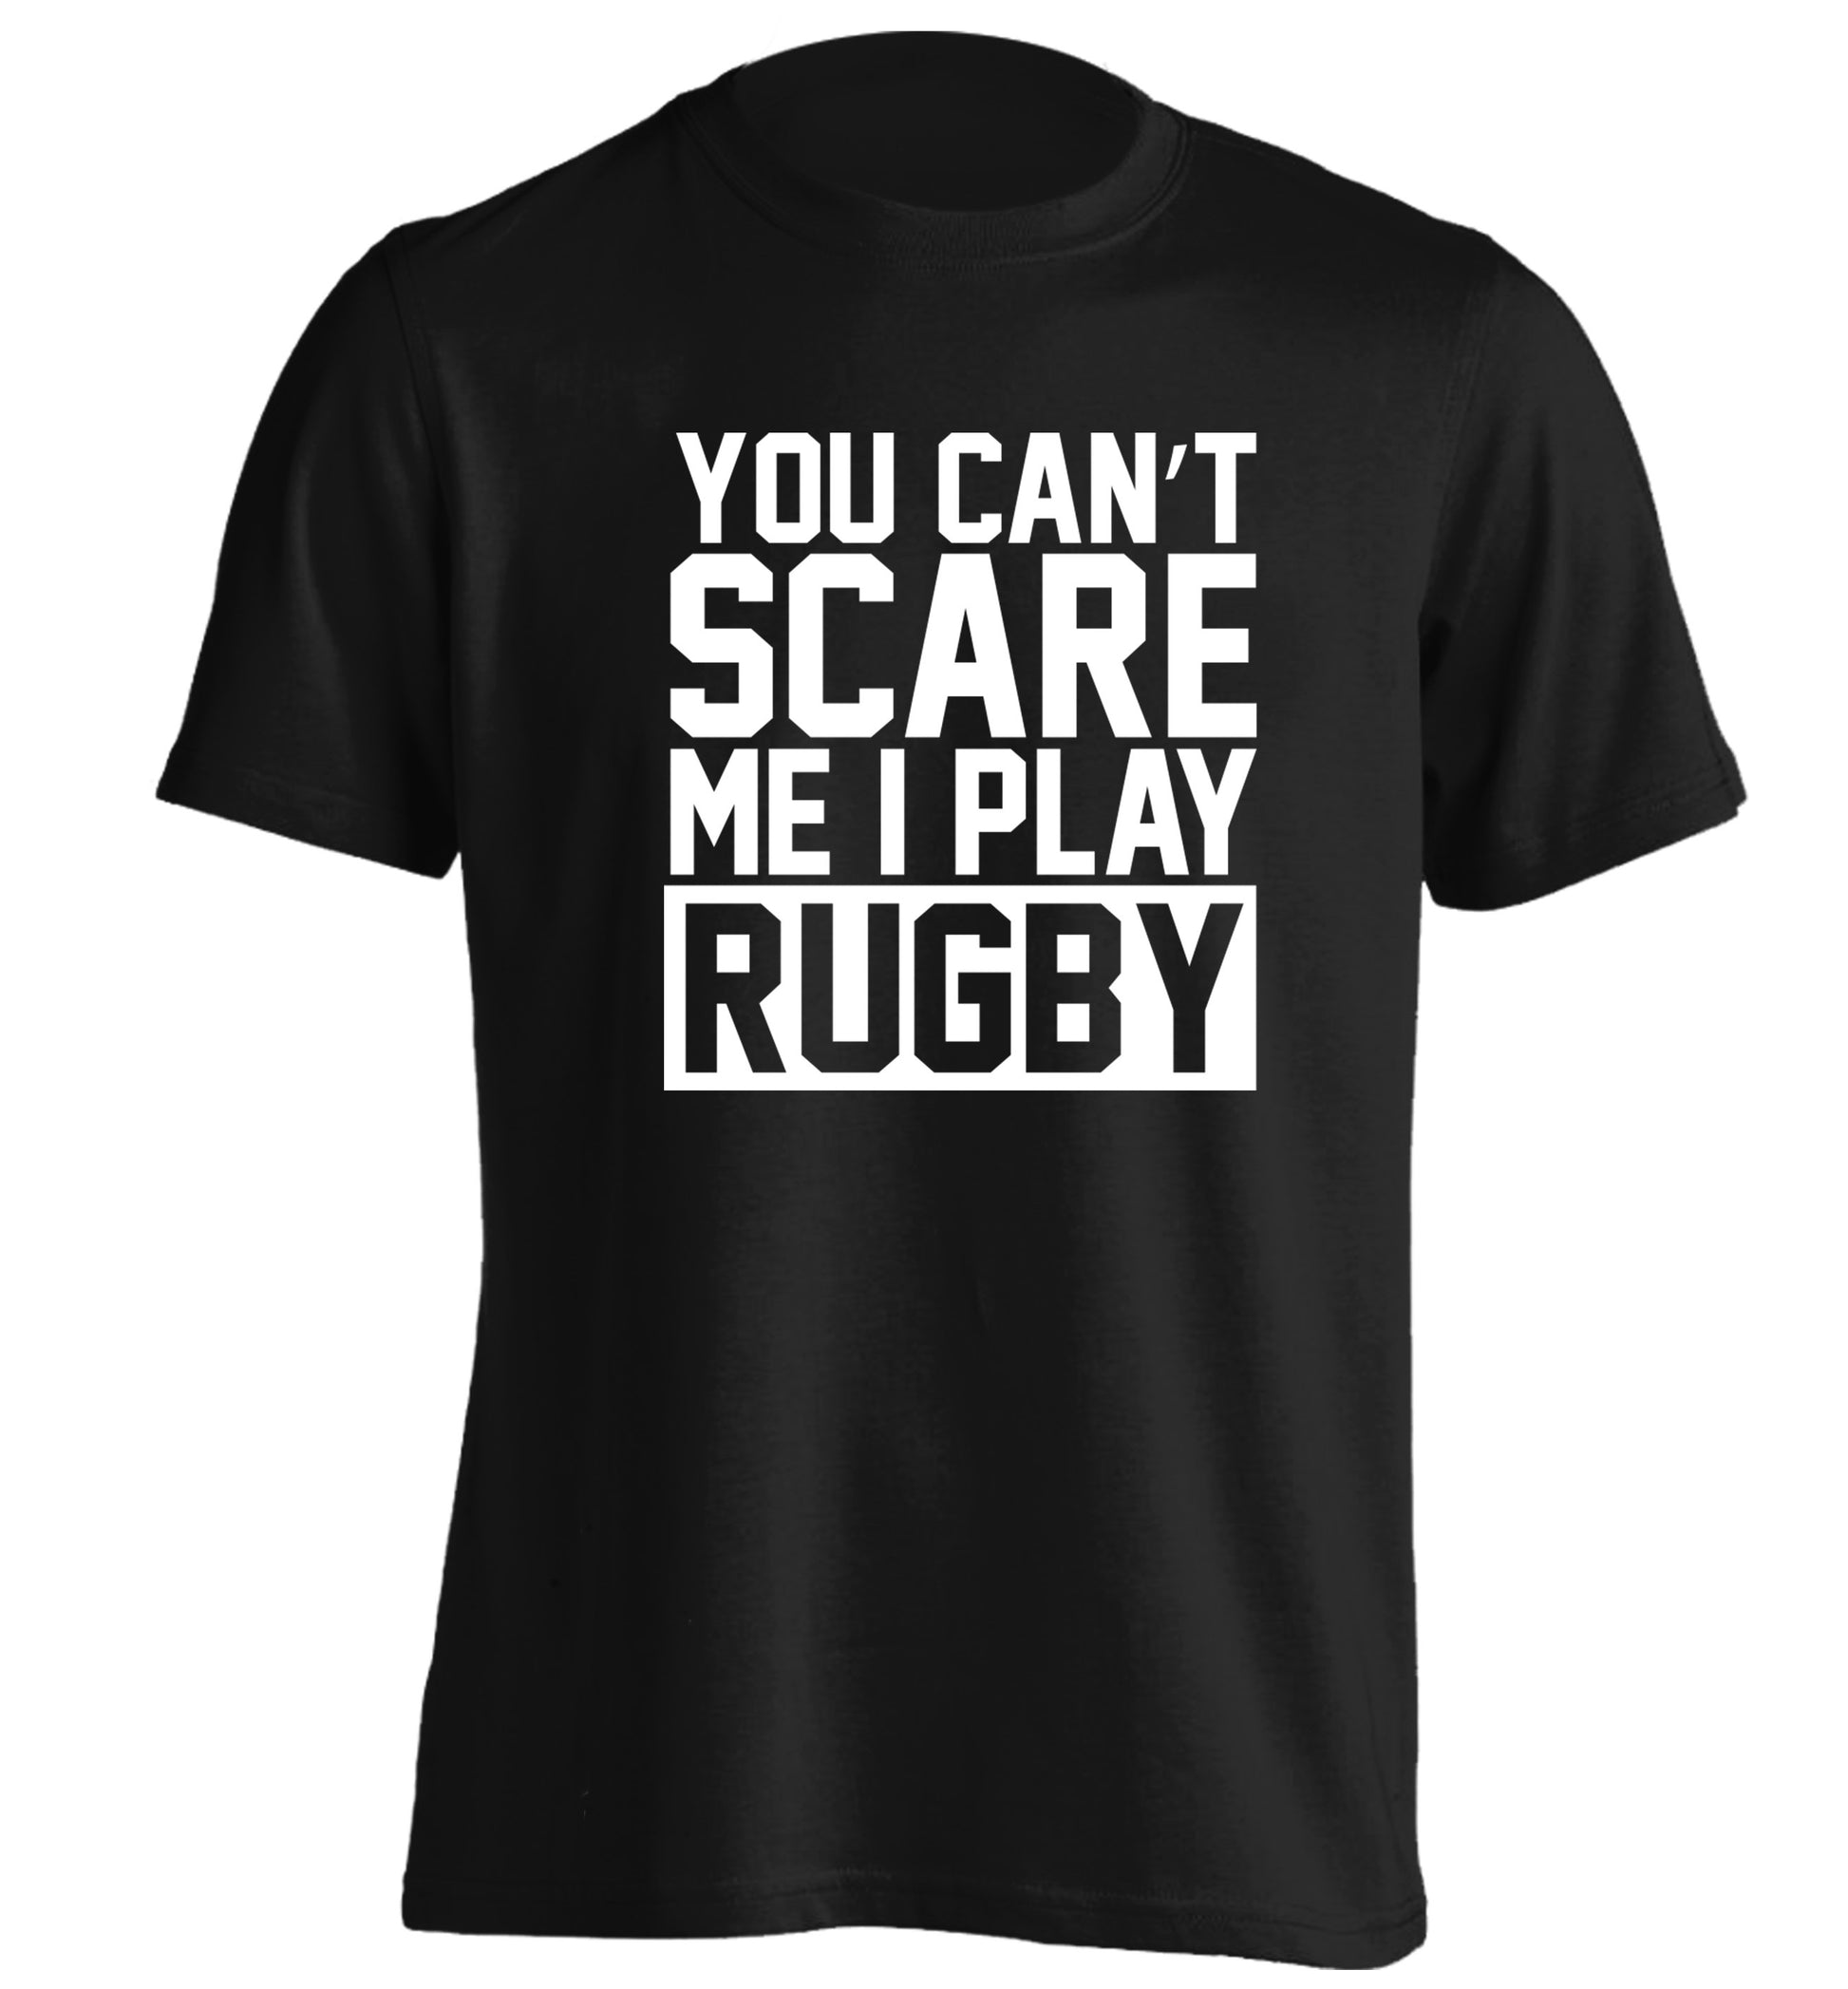 You can't scare me I play rugby adults unisex black Tshirt 2XL